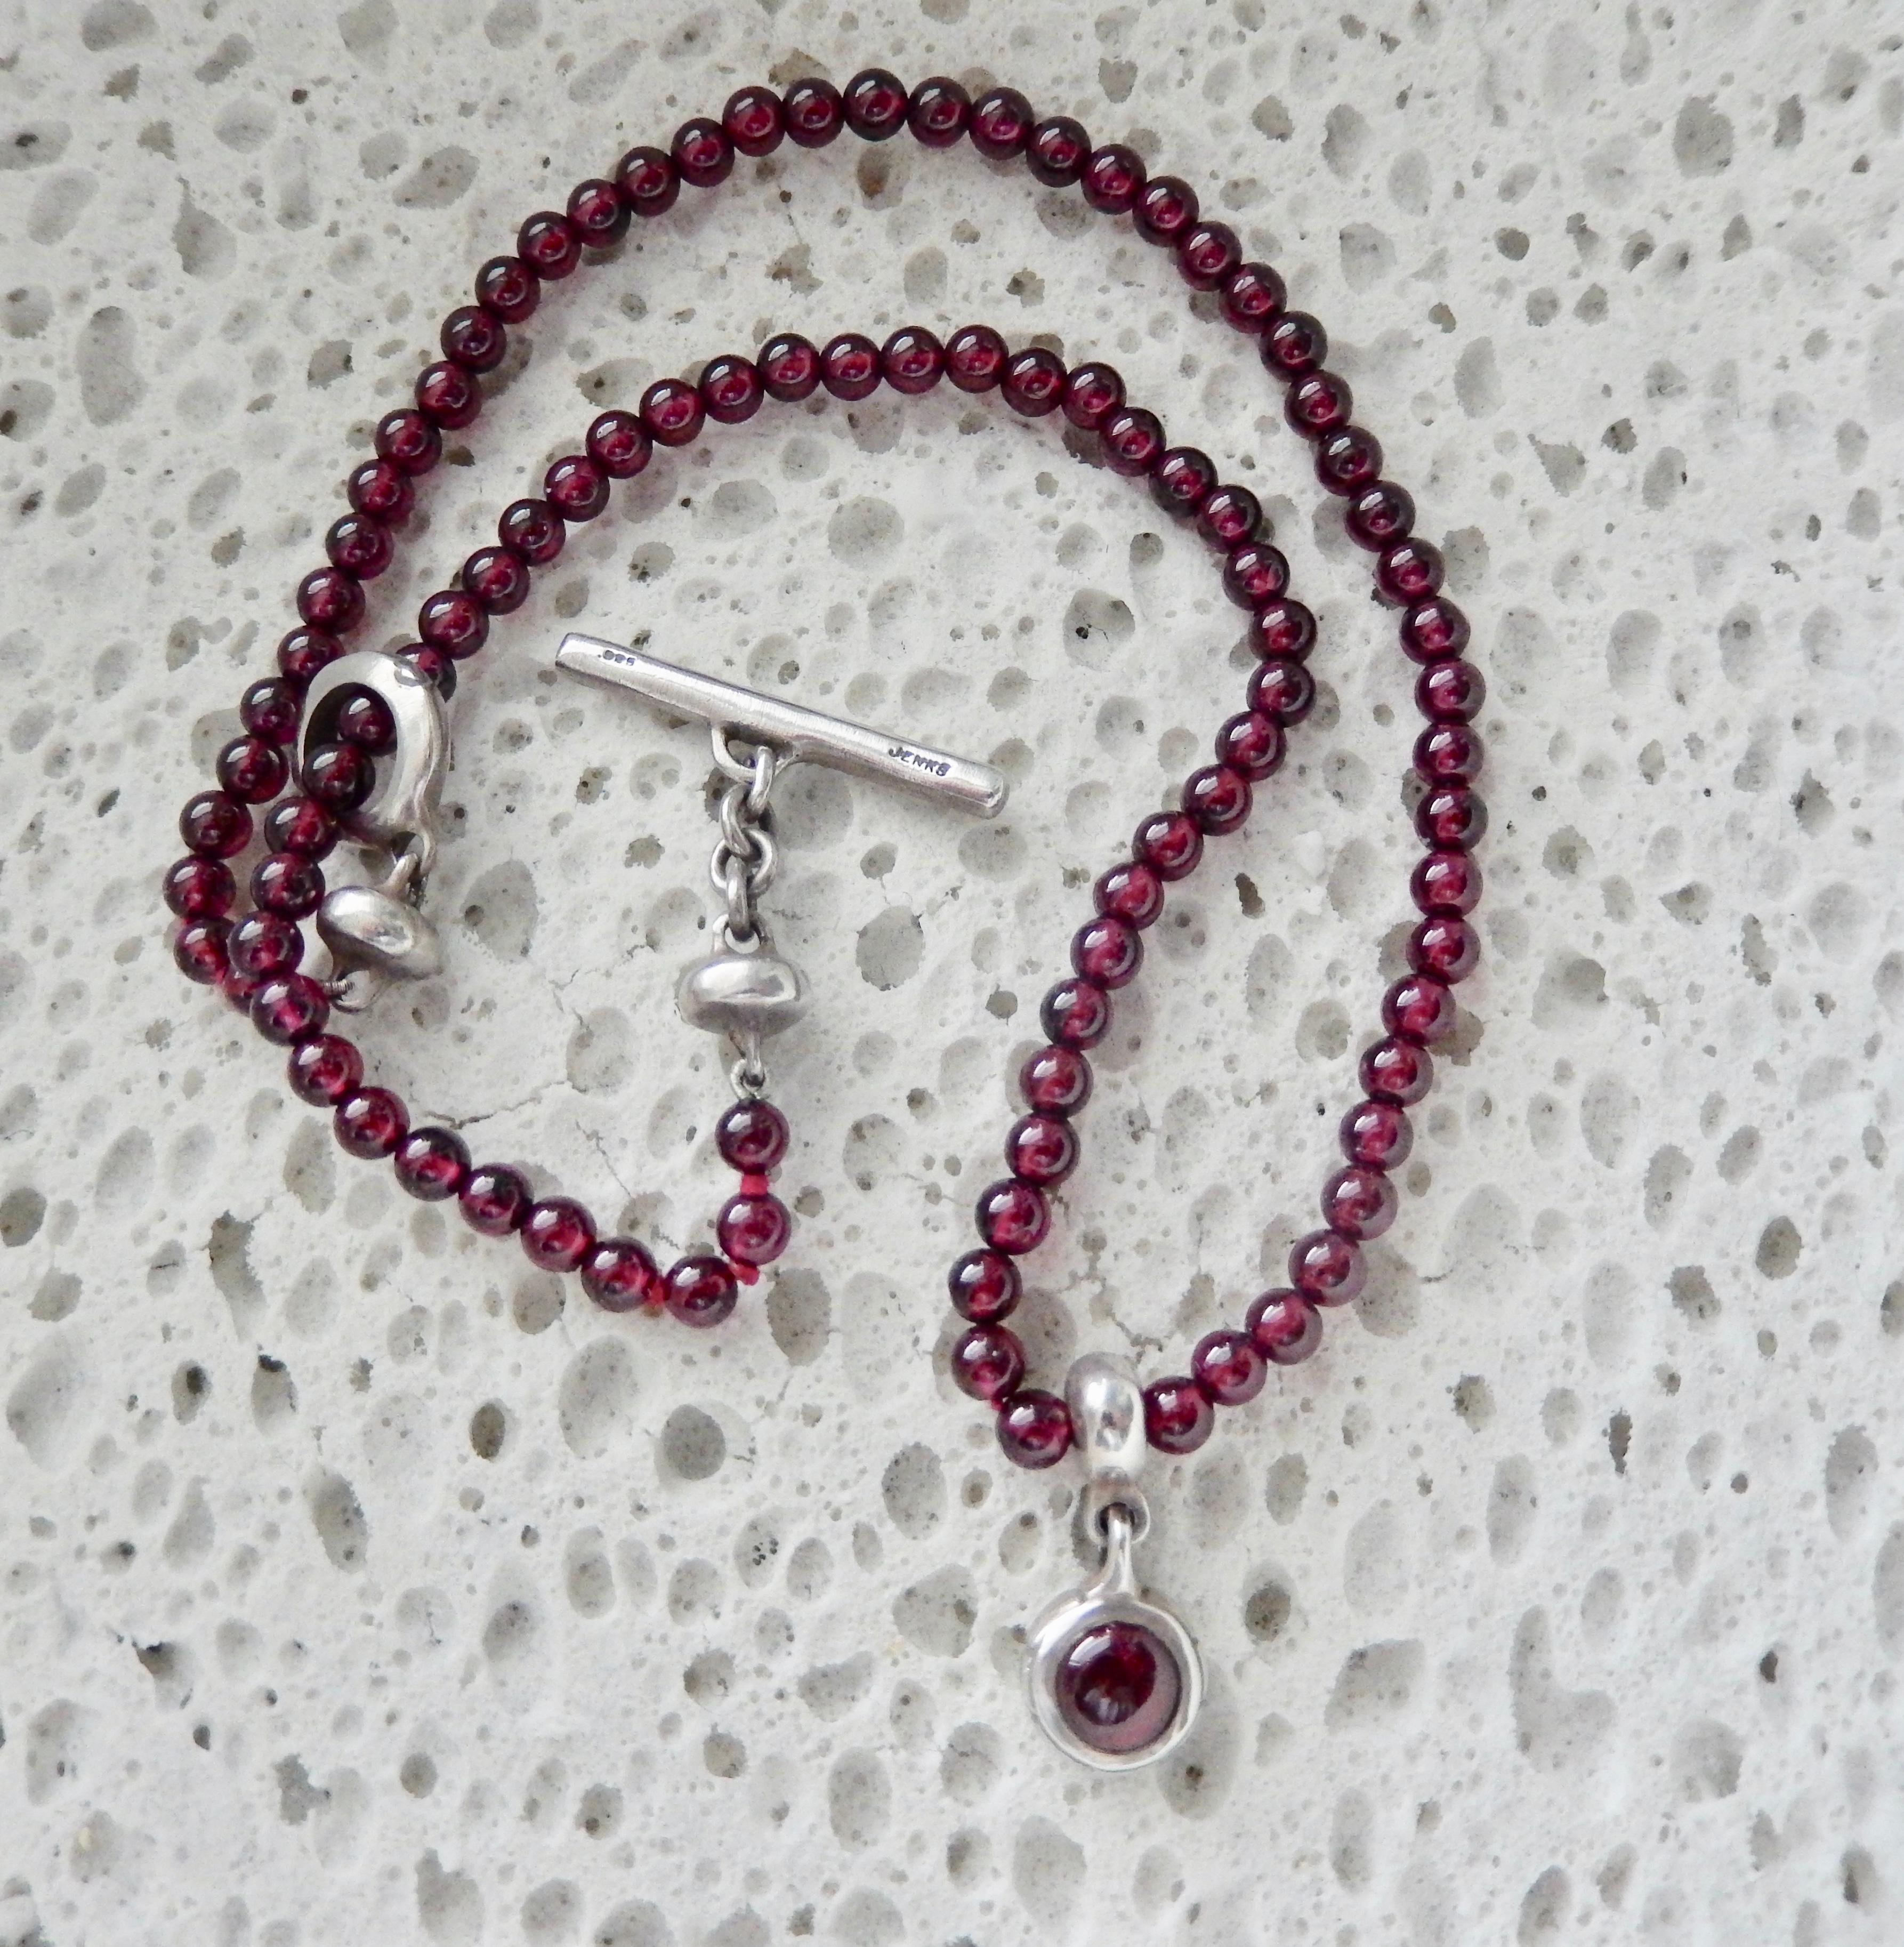 An amethyst beaded necklace with sterling pendant and clasp by the American jewelry designer Lisa Jenks, known for her fine workmanship and innovative designs. Her handmade pieces focus on simple modernist forms inspired by diverse cultures,